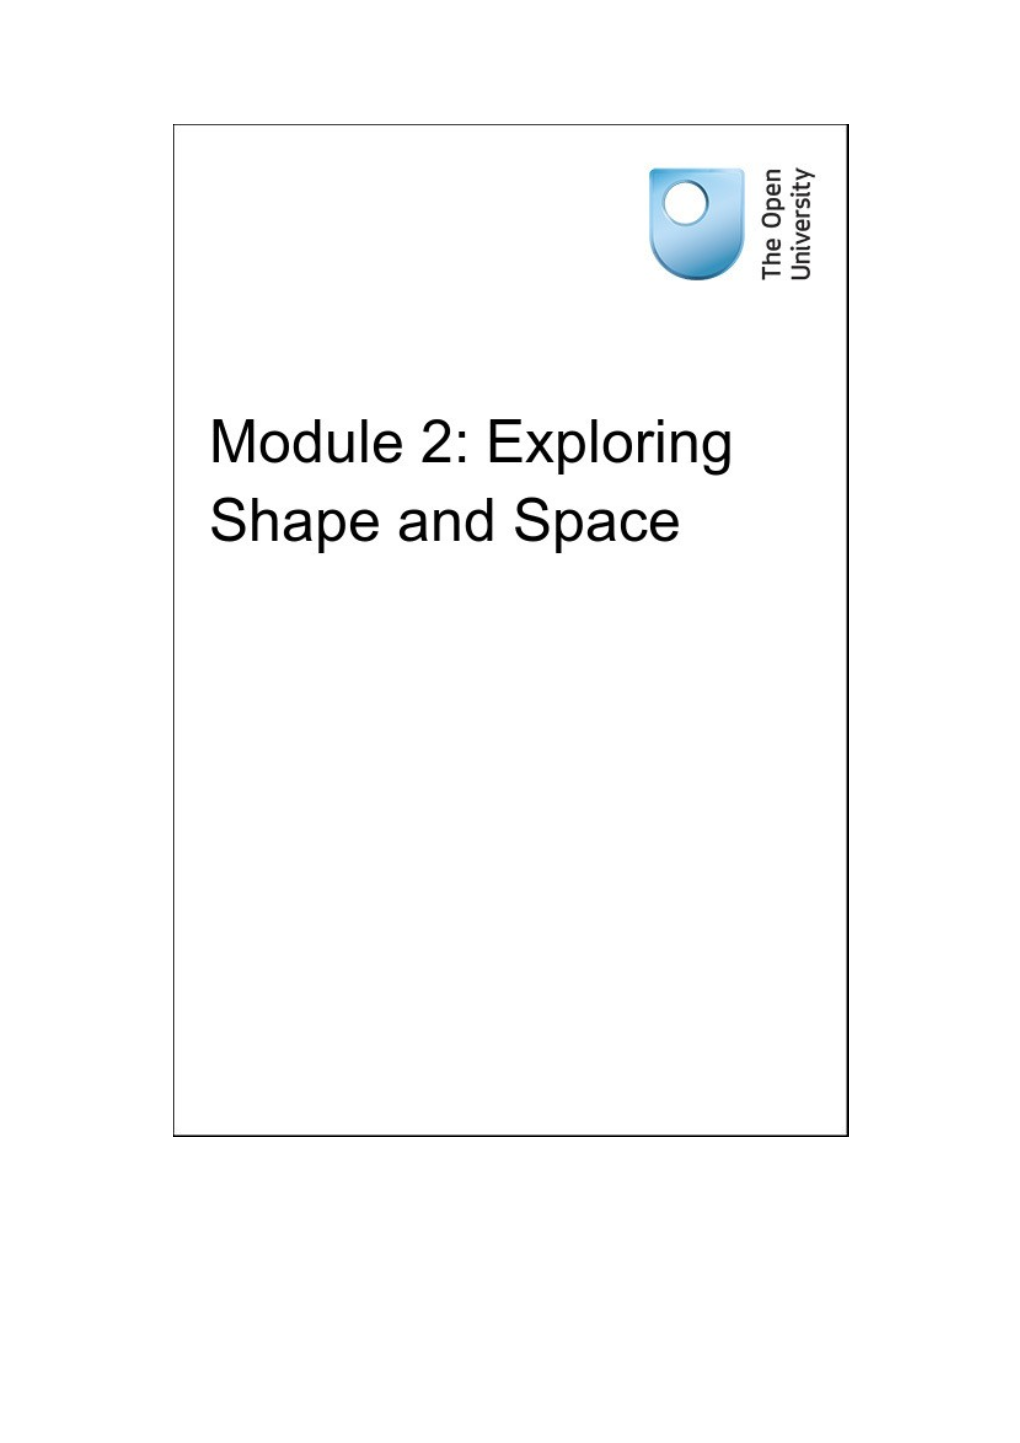 Module 2: Exploring Shape and Space